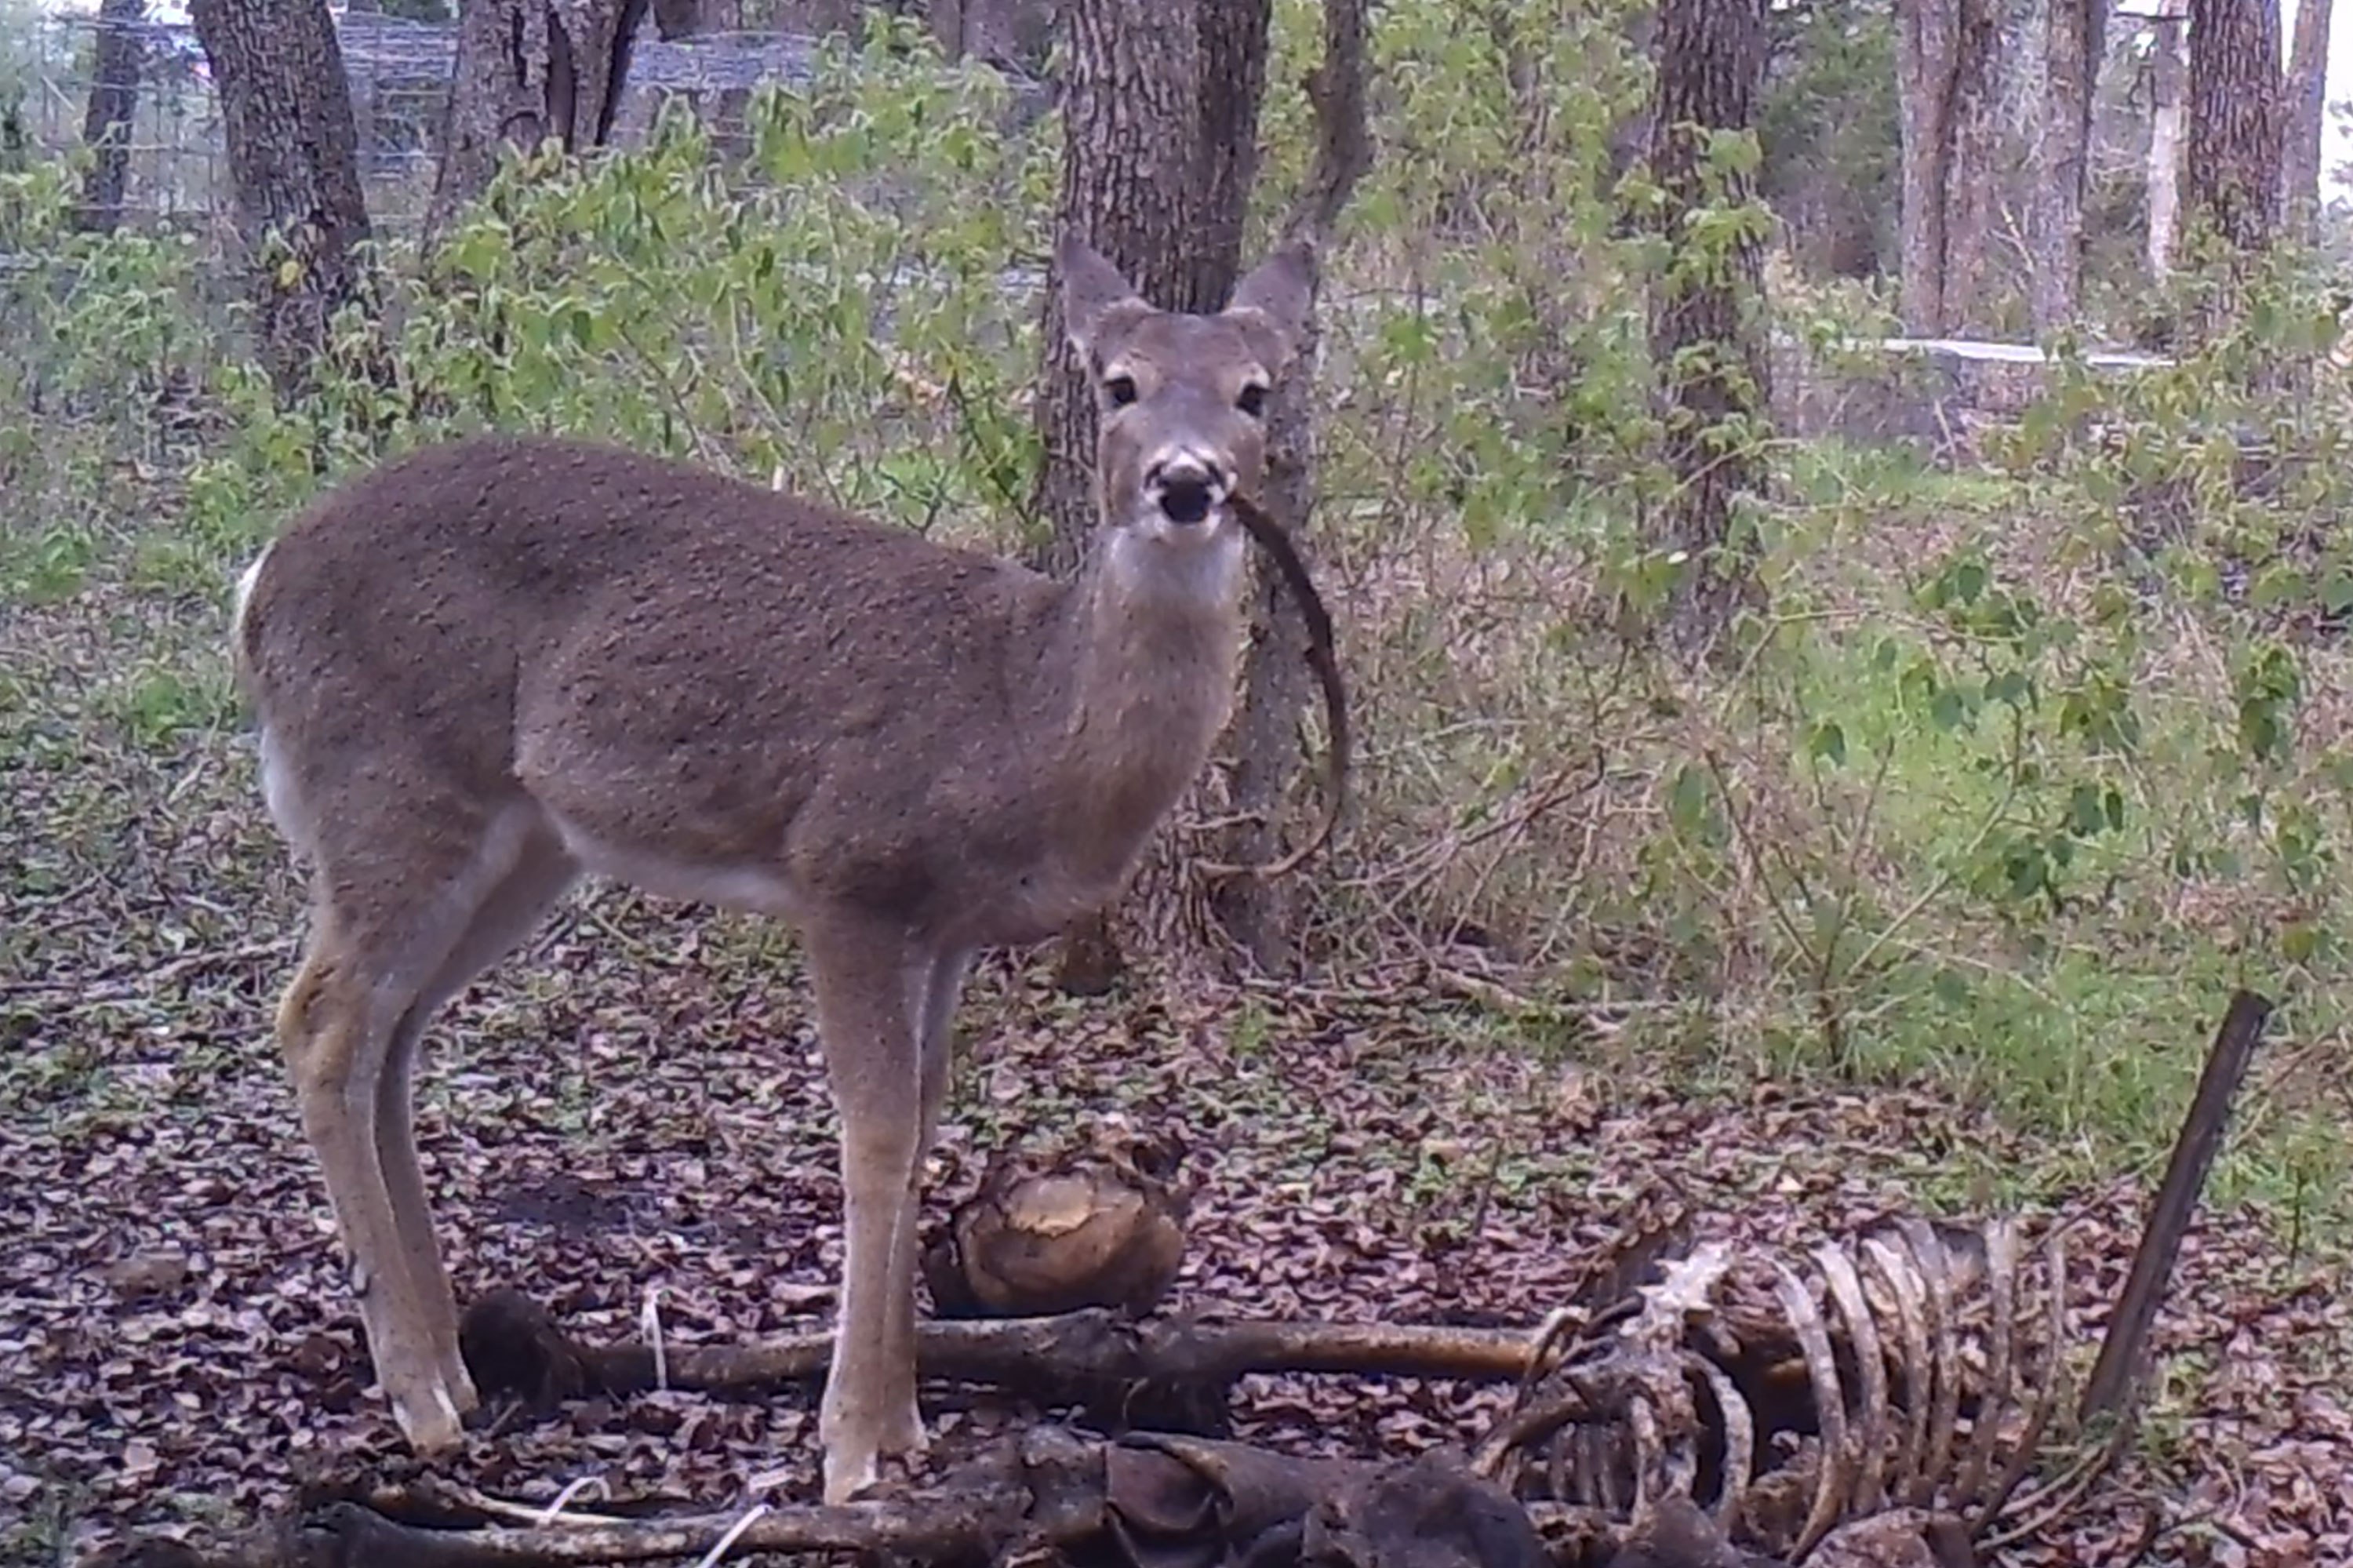 Deer found feasting on human remains